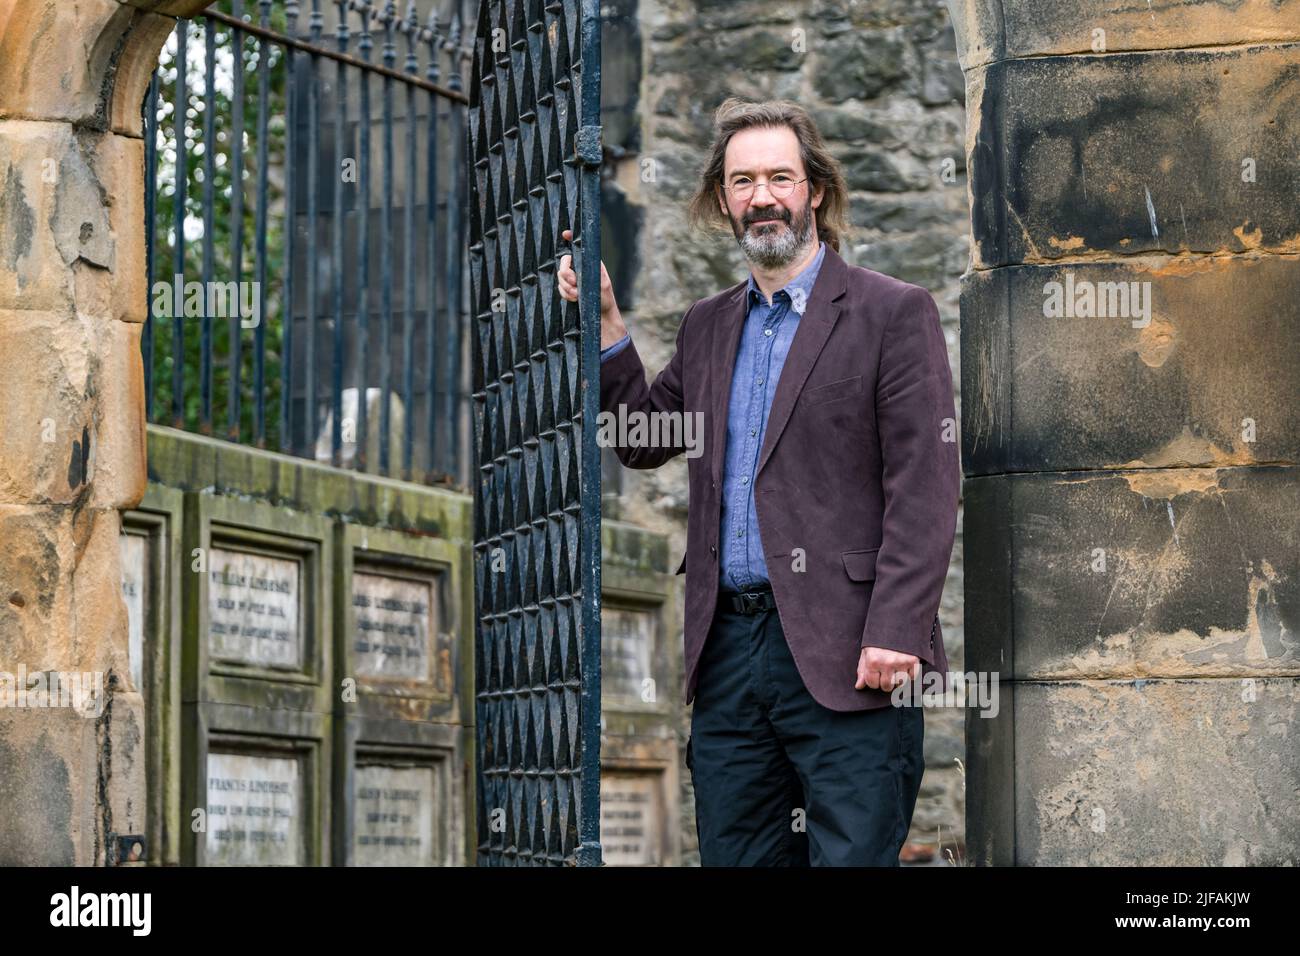 Scottish crime writer author James Oswald in South Leith Parish Church graveyard by an ornate grille in a mausoleum, Edinburgh, Scotland, UK Stock Photo